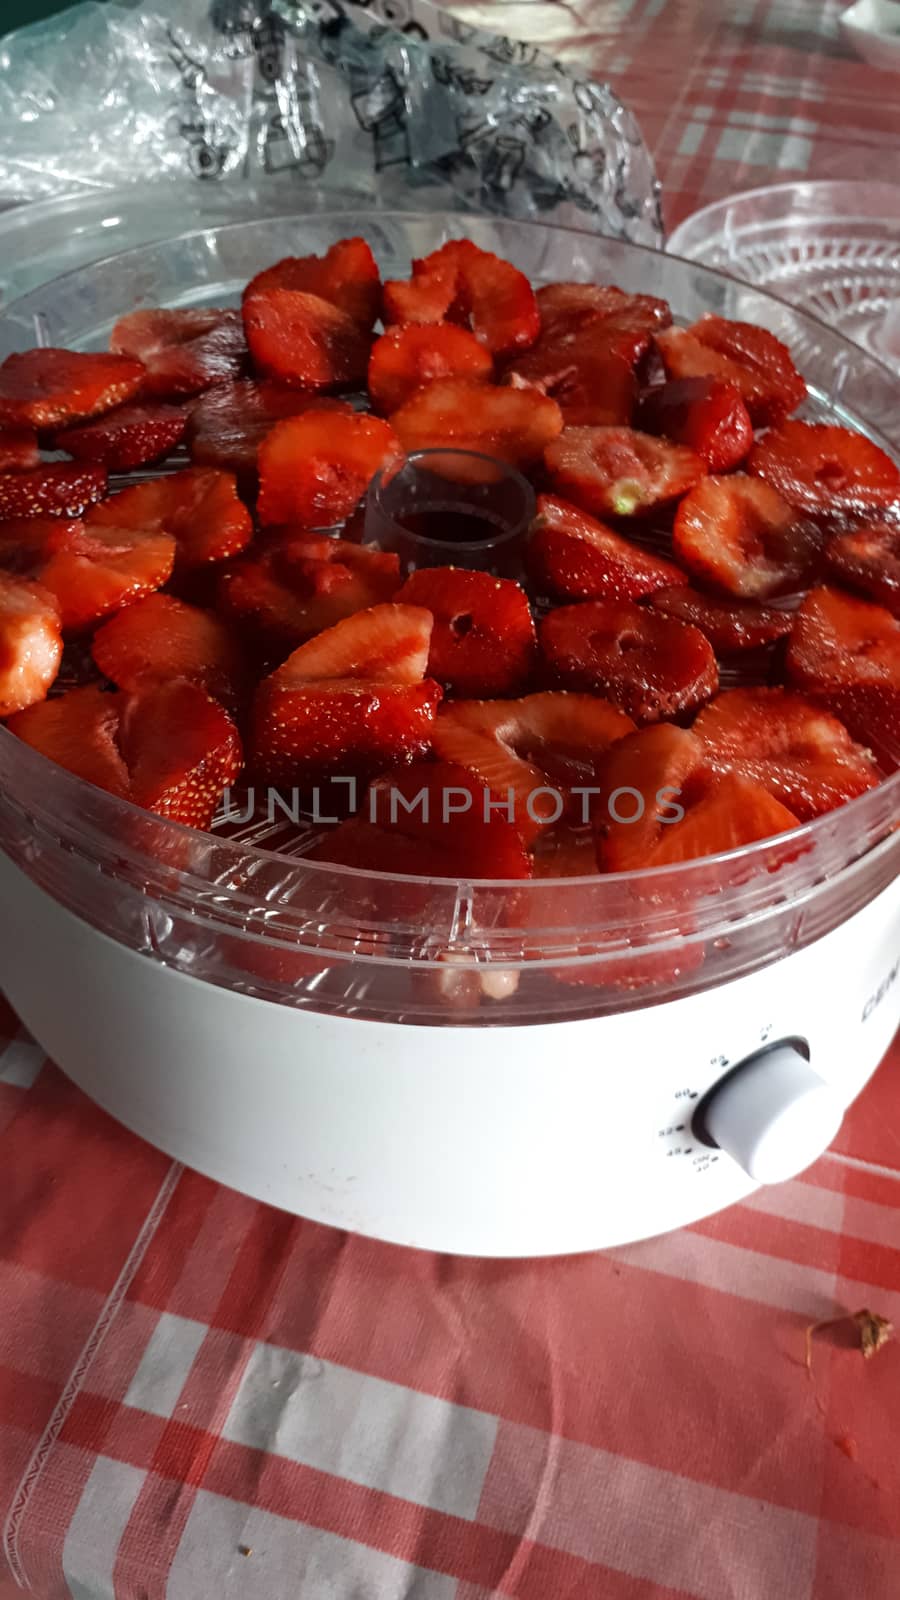 Ripe juicy red strawberry in a white cup. strawberry crop.